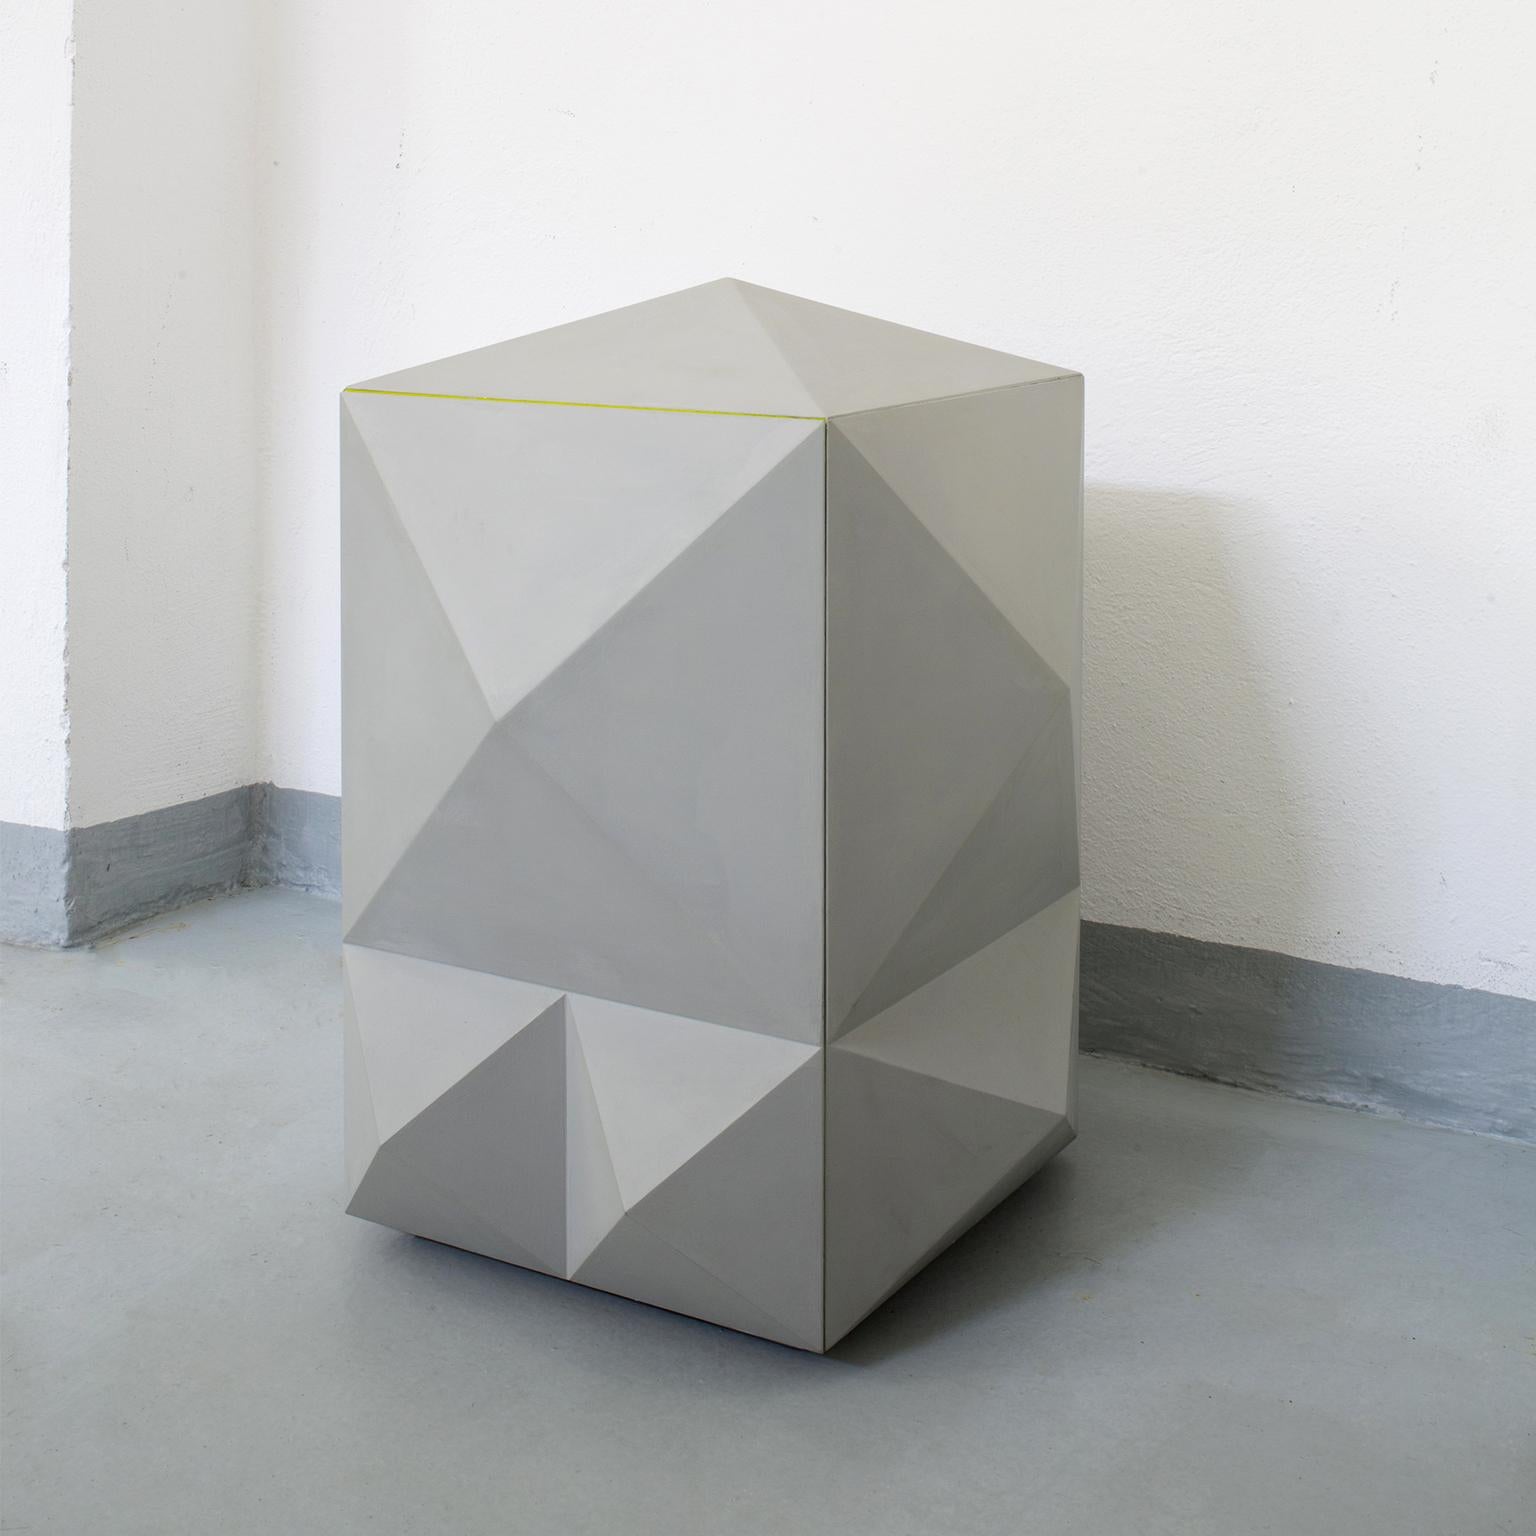 I Diamanti is a collection of hand painted cabinets, made of wood with extruded geometric shapes inspired to the Palazzo dei Diamanti in Ferrara. Each piece is an extraordinary sculpture which can be opened with an Electronic device included in a